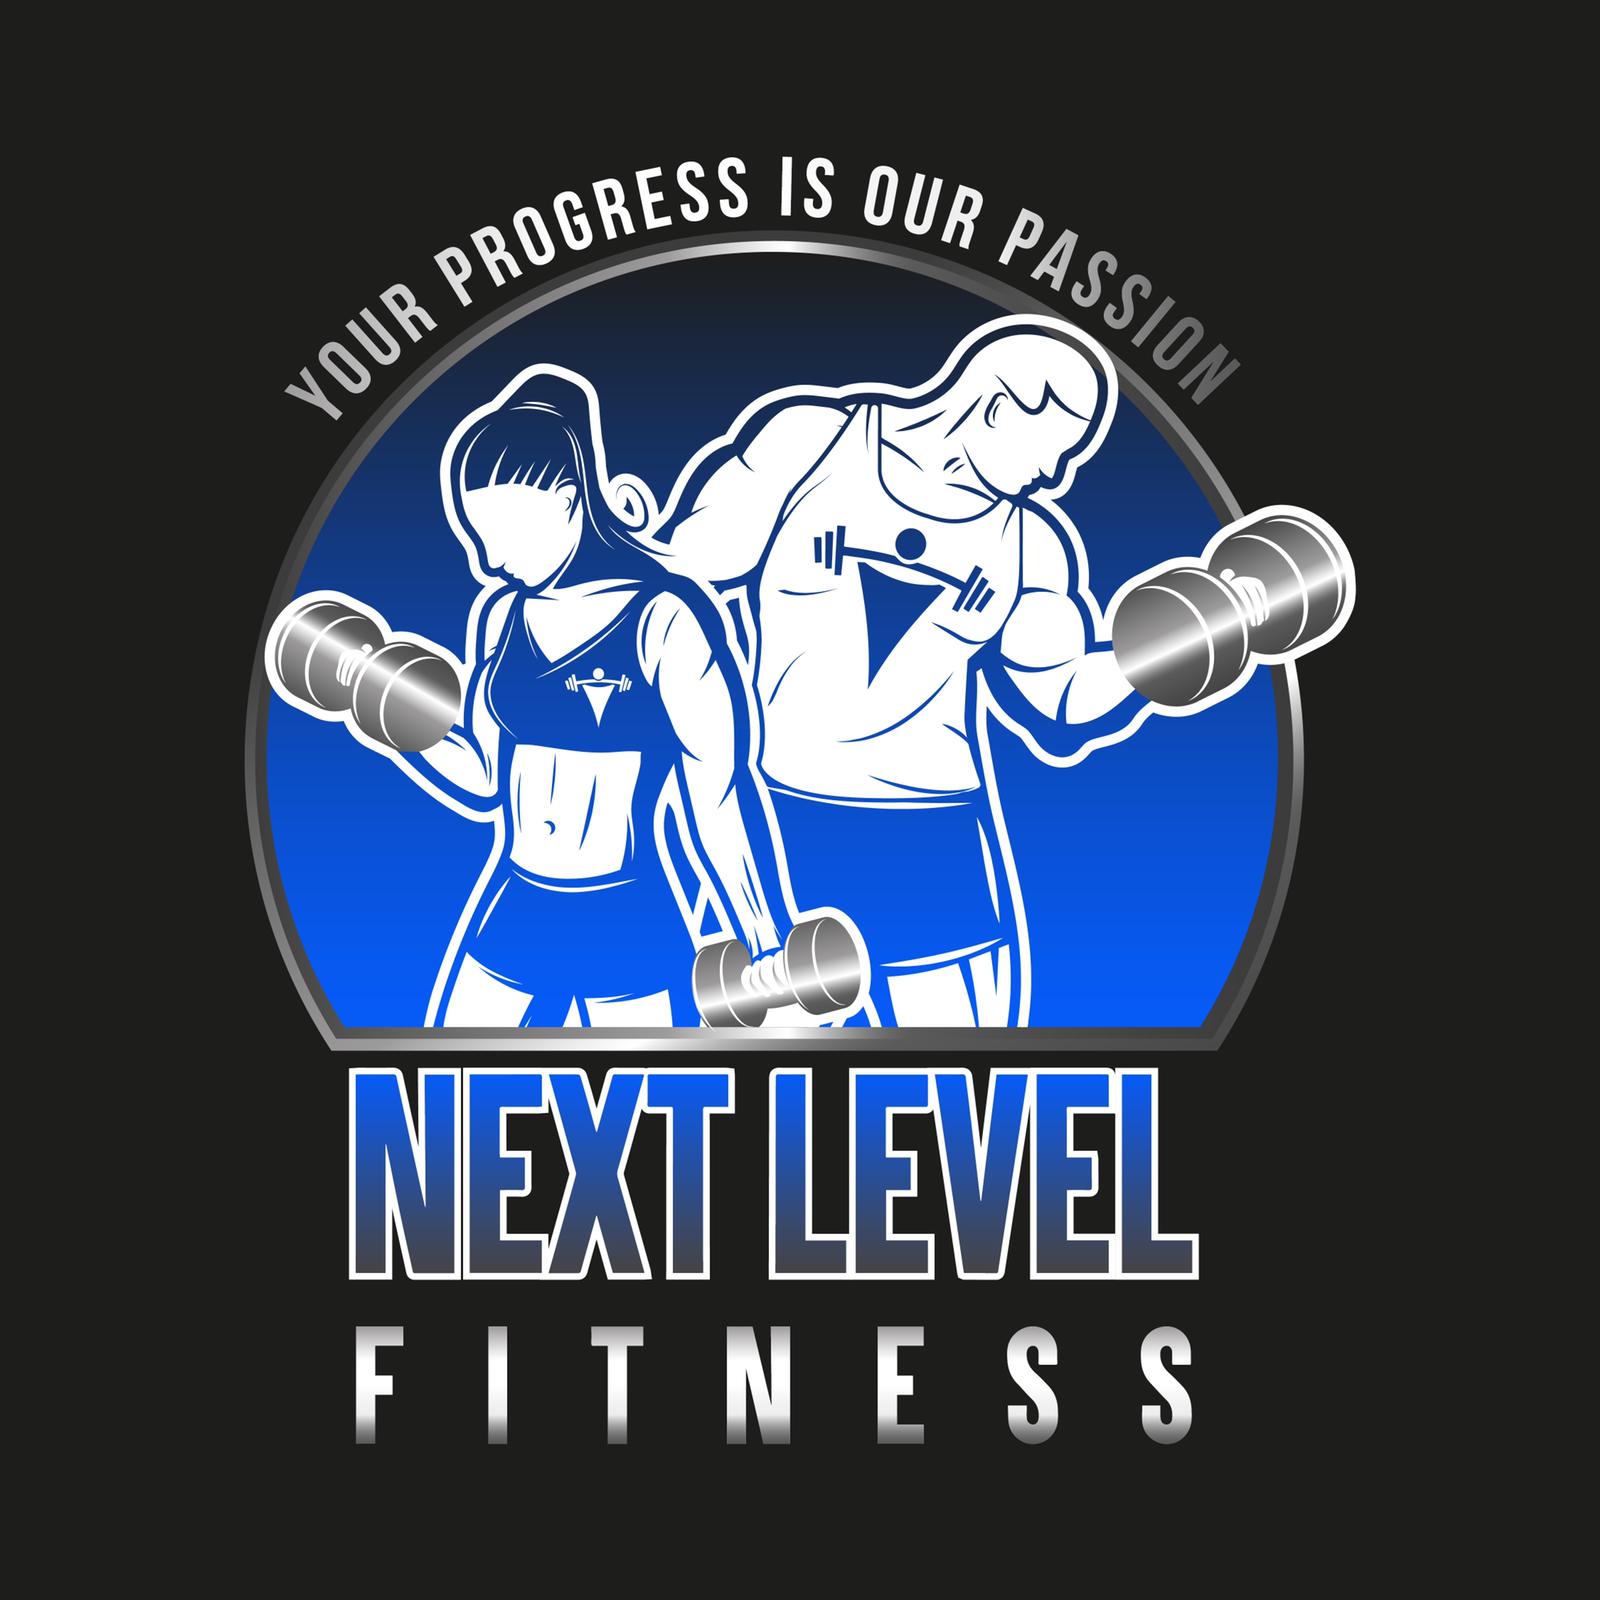 Next level fitness free weights